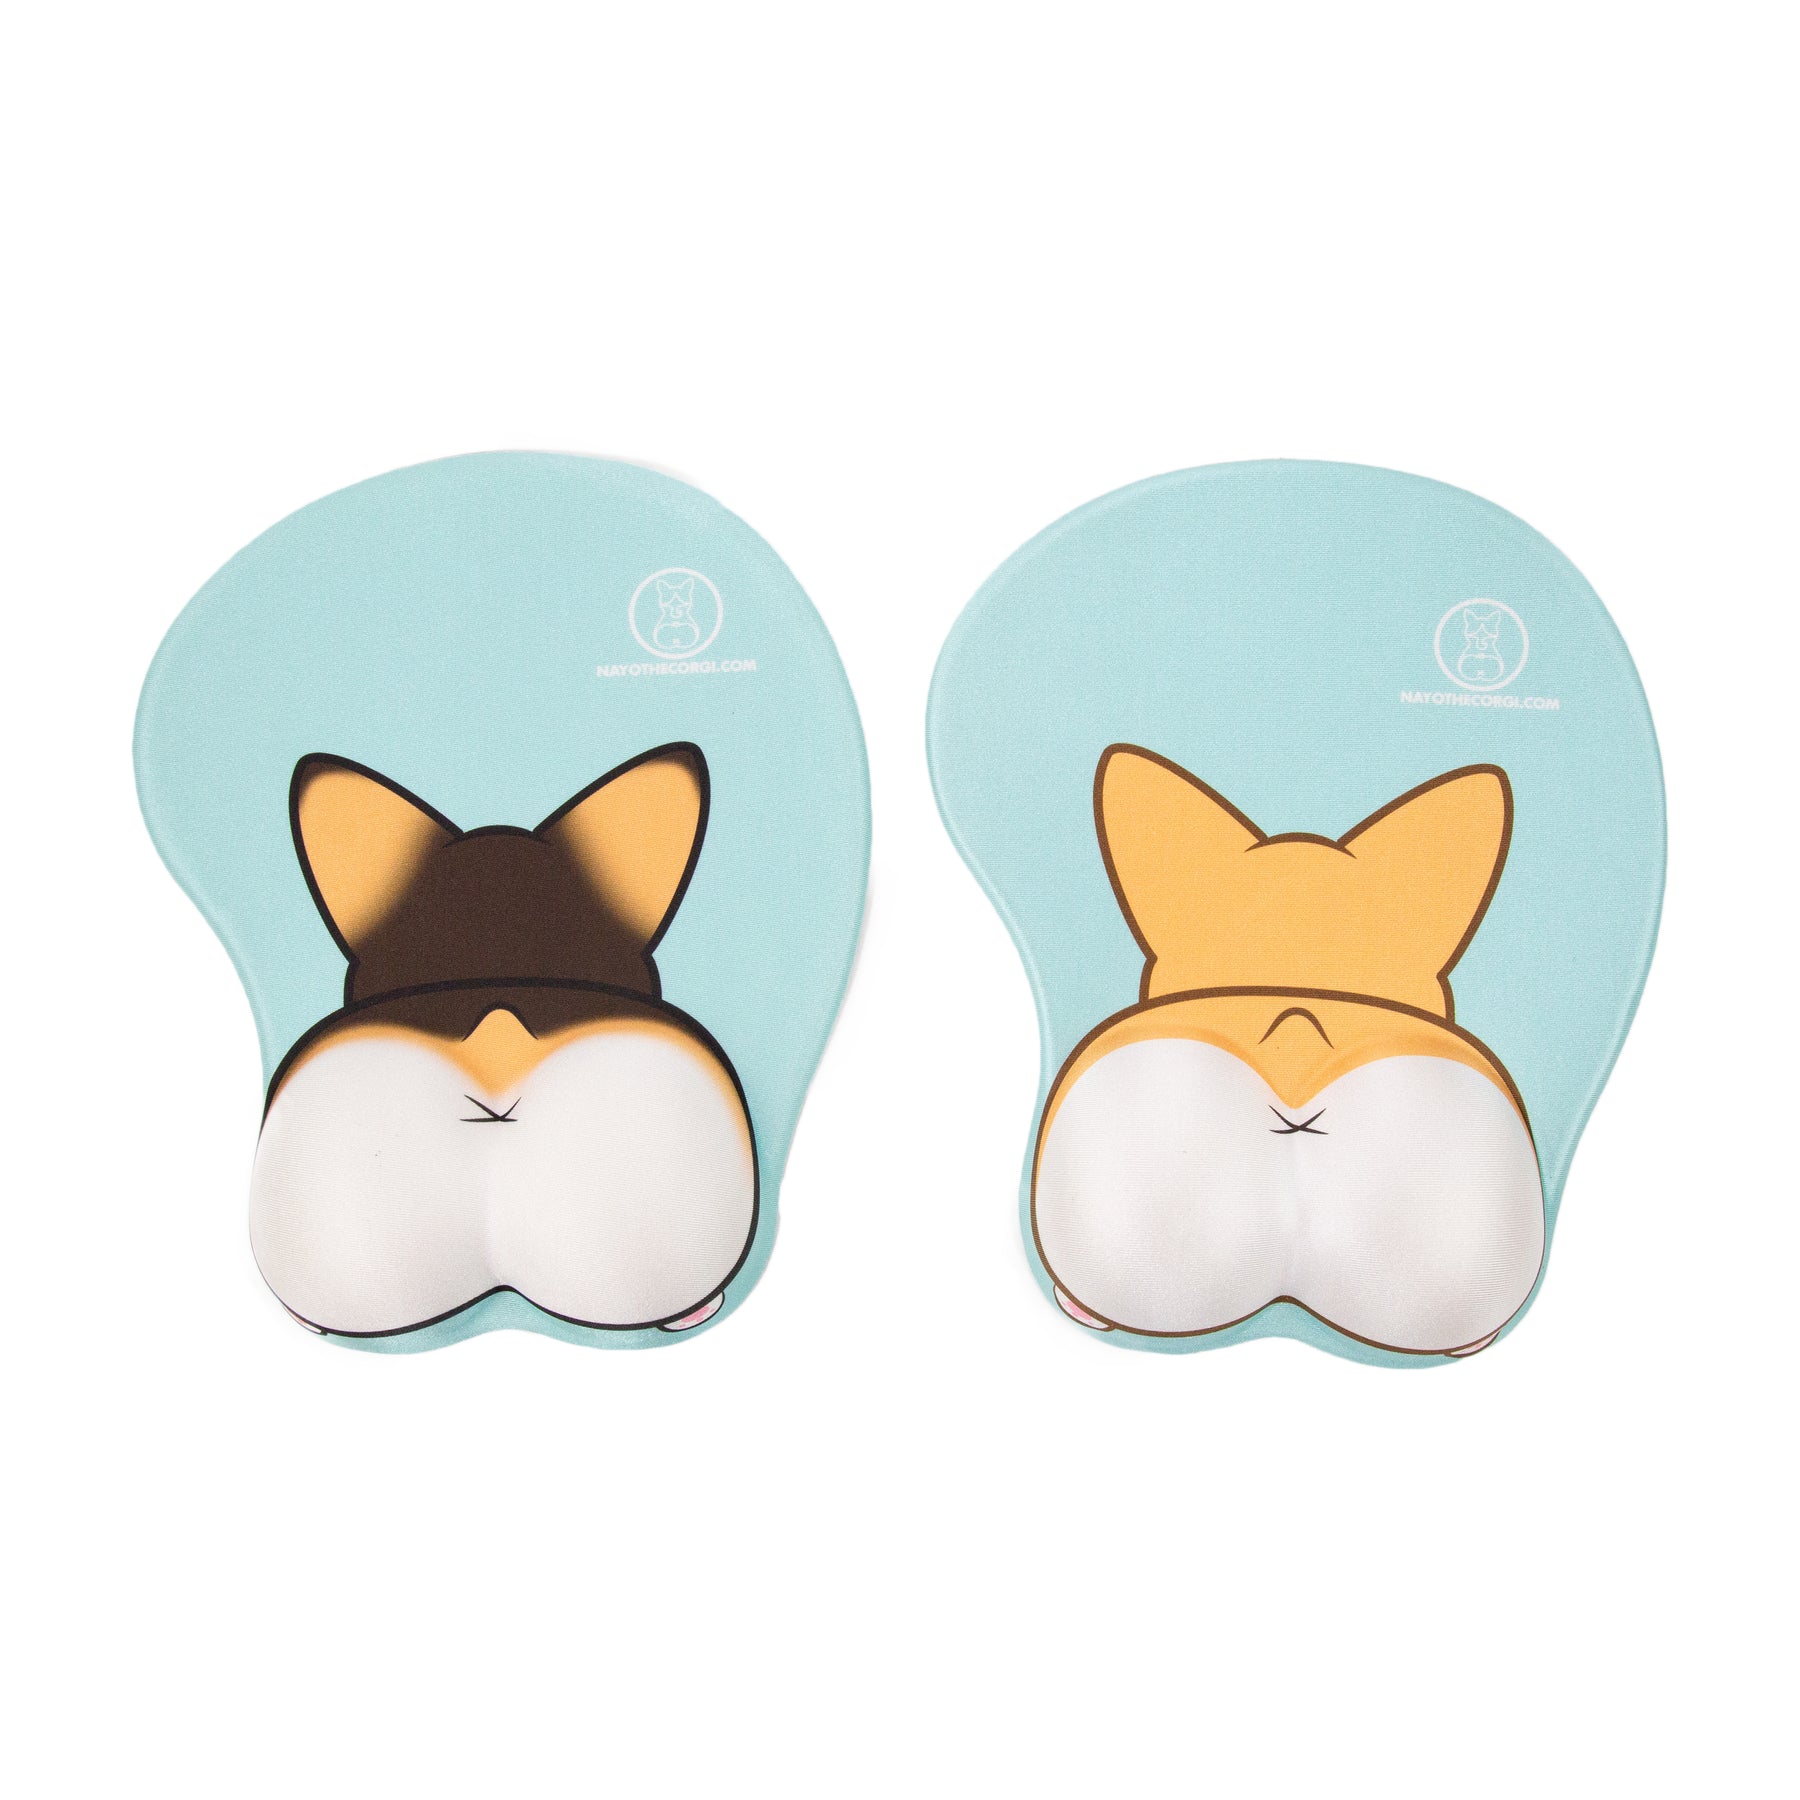 Tan and Tri Color 3D Corgi Butt handrest Mouse Pad Next To Eachother